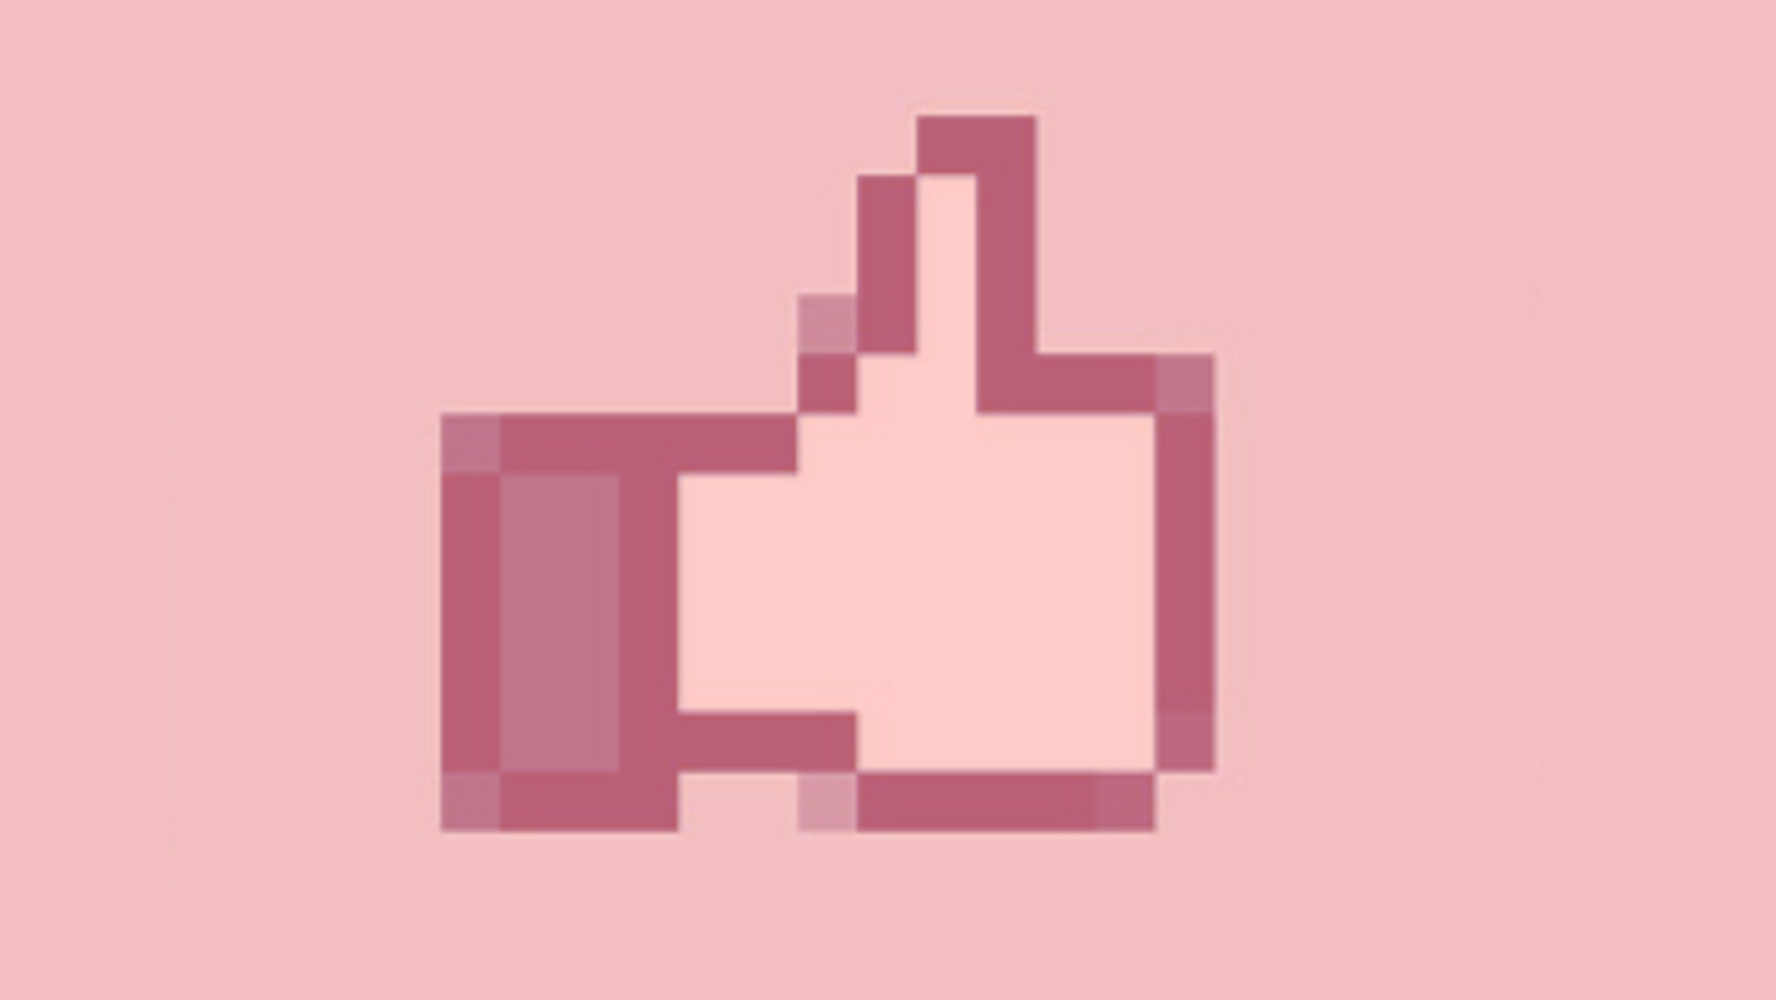 A blocky, pixelised thumbs-up icon with a semi-transparent salmon-coloured overlay.